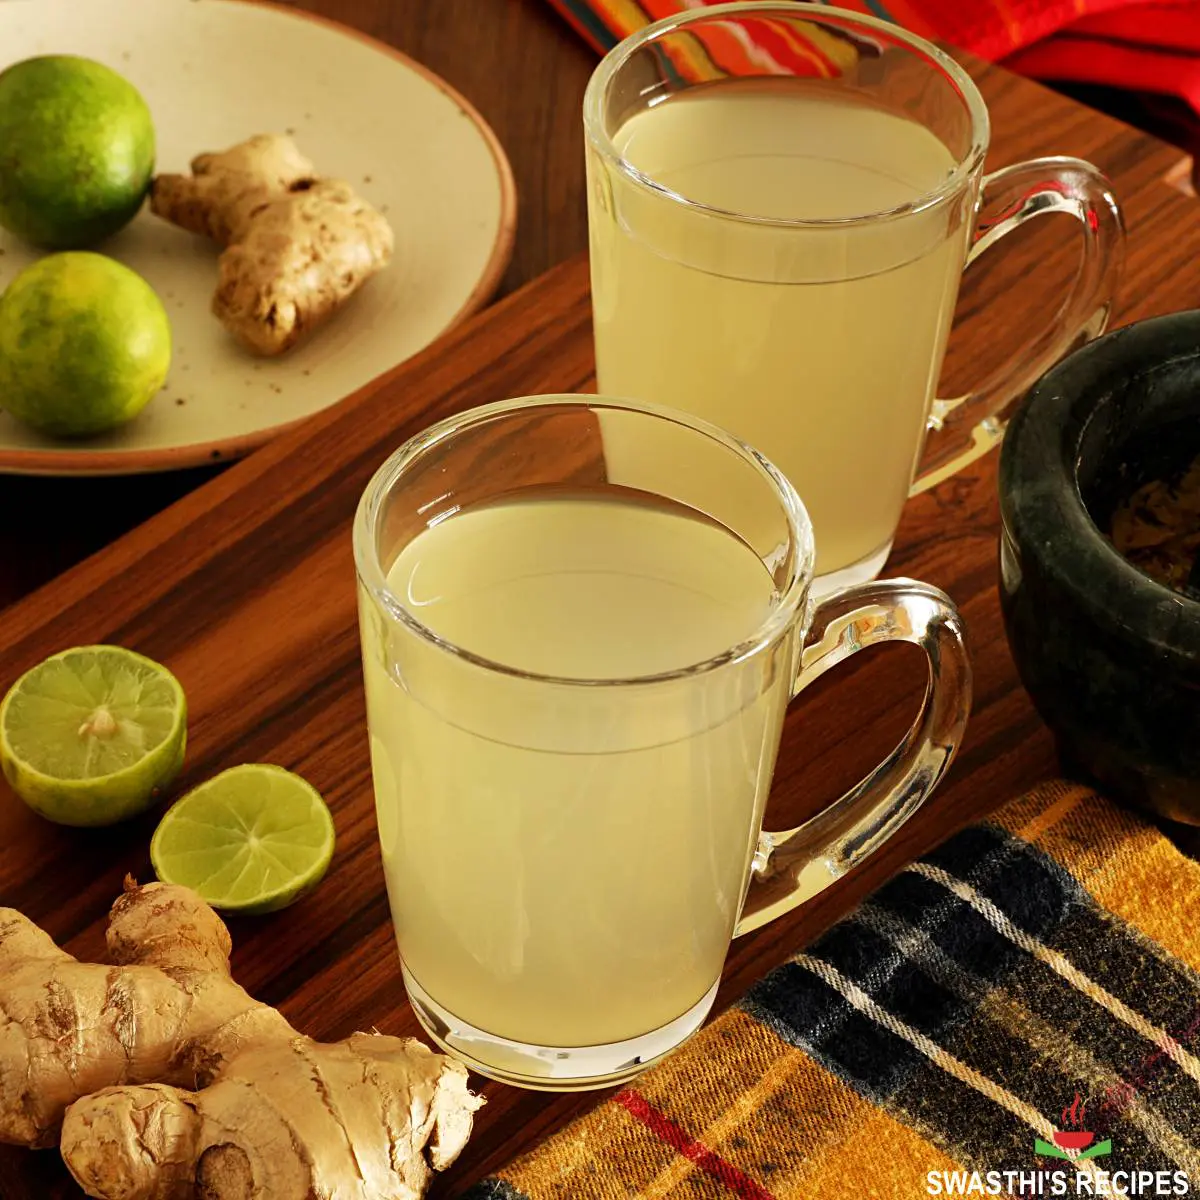 Ginger tea recipe made with fresh ginger and water